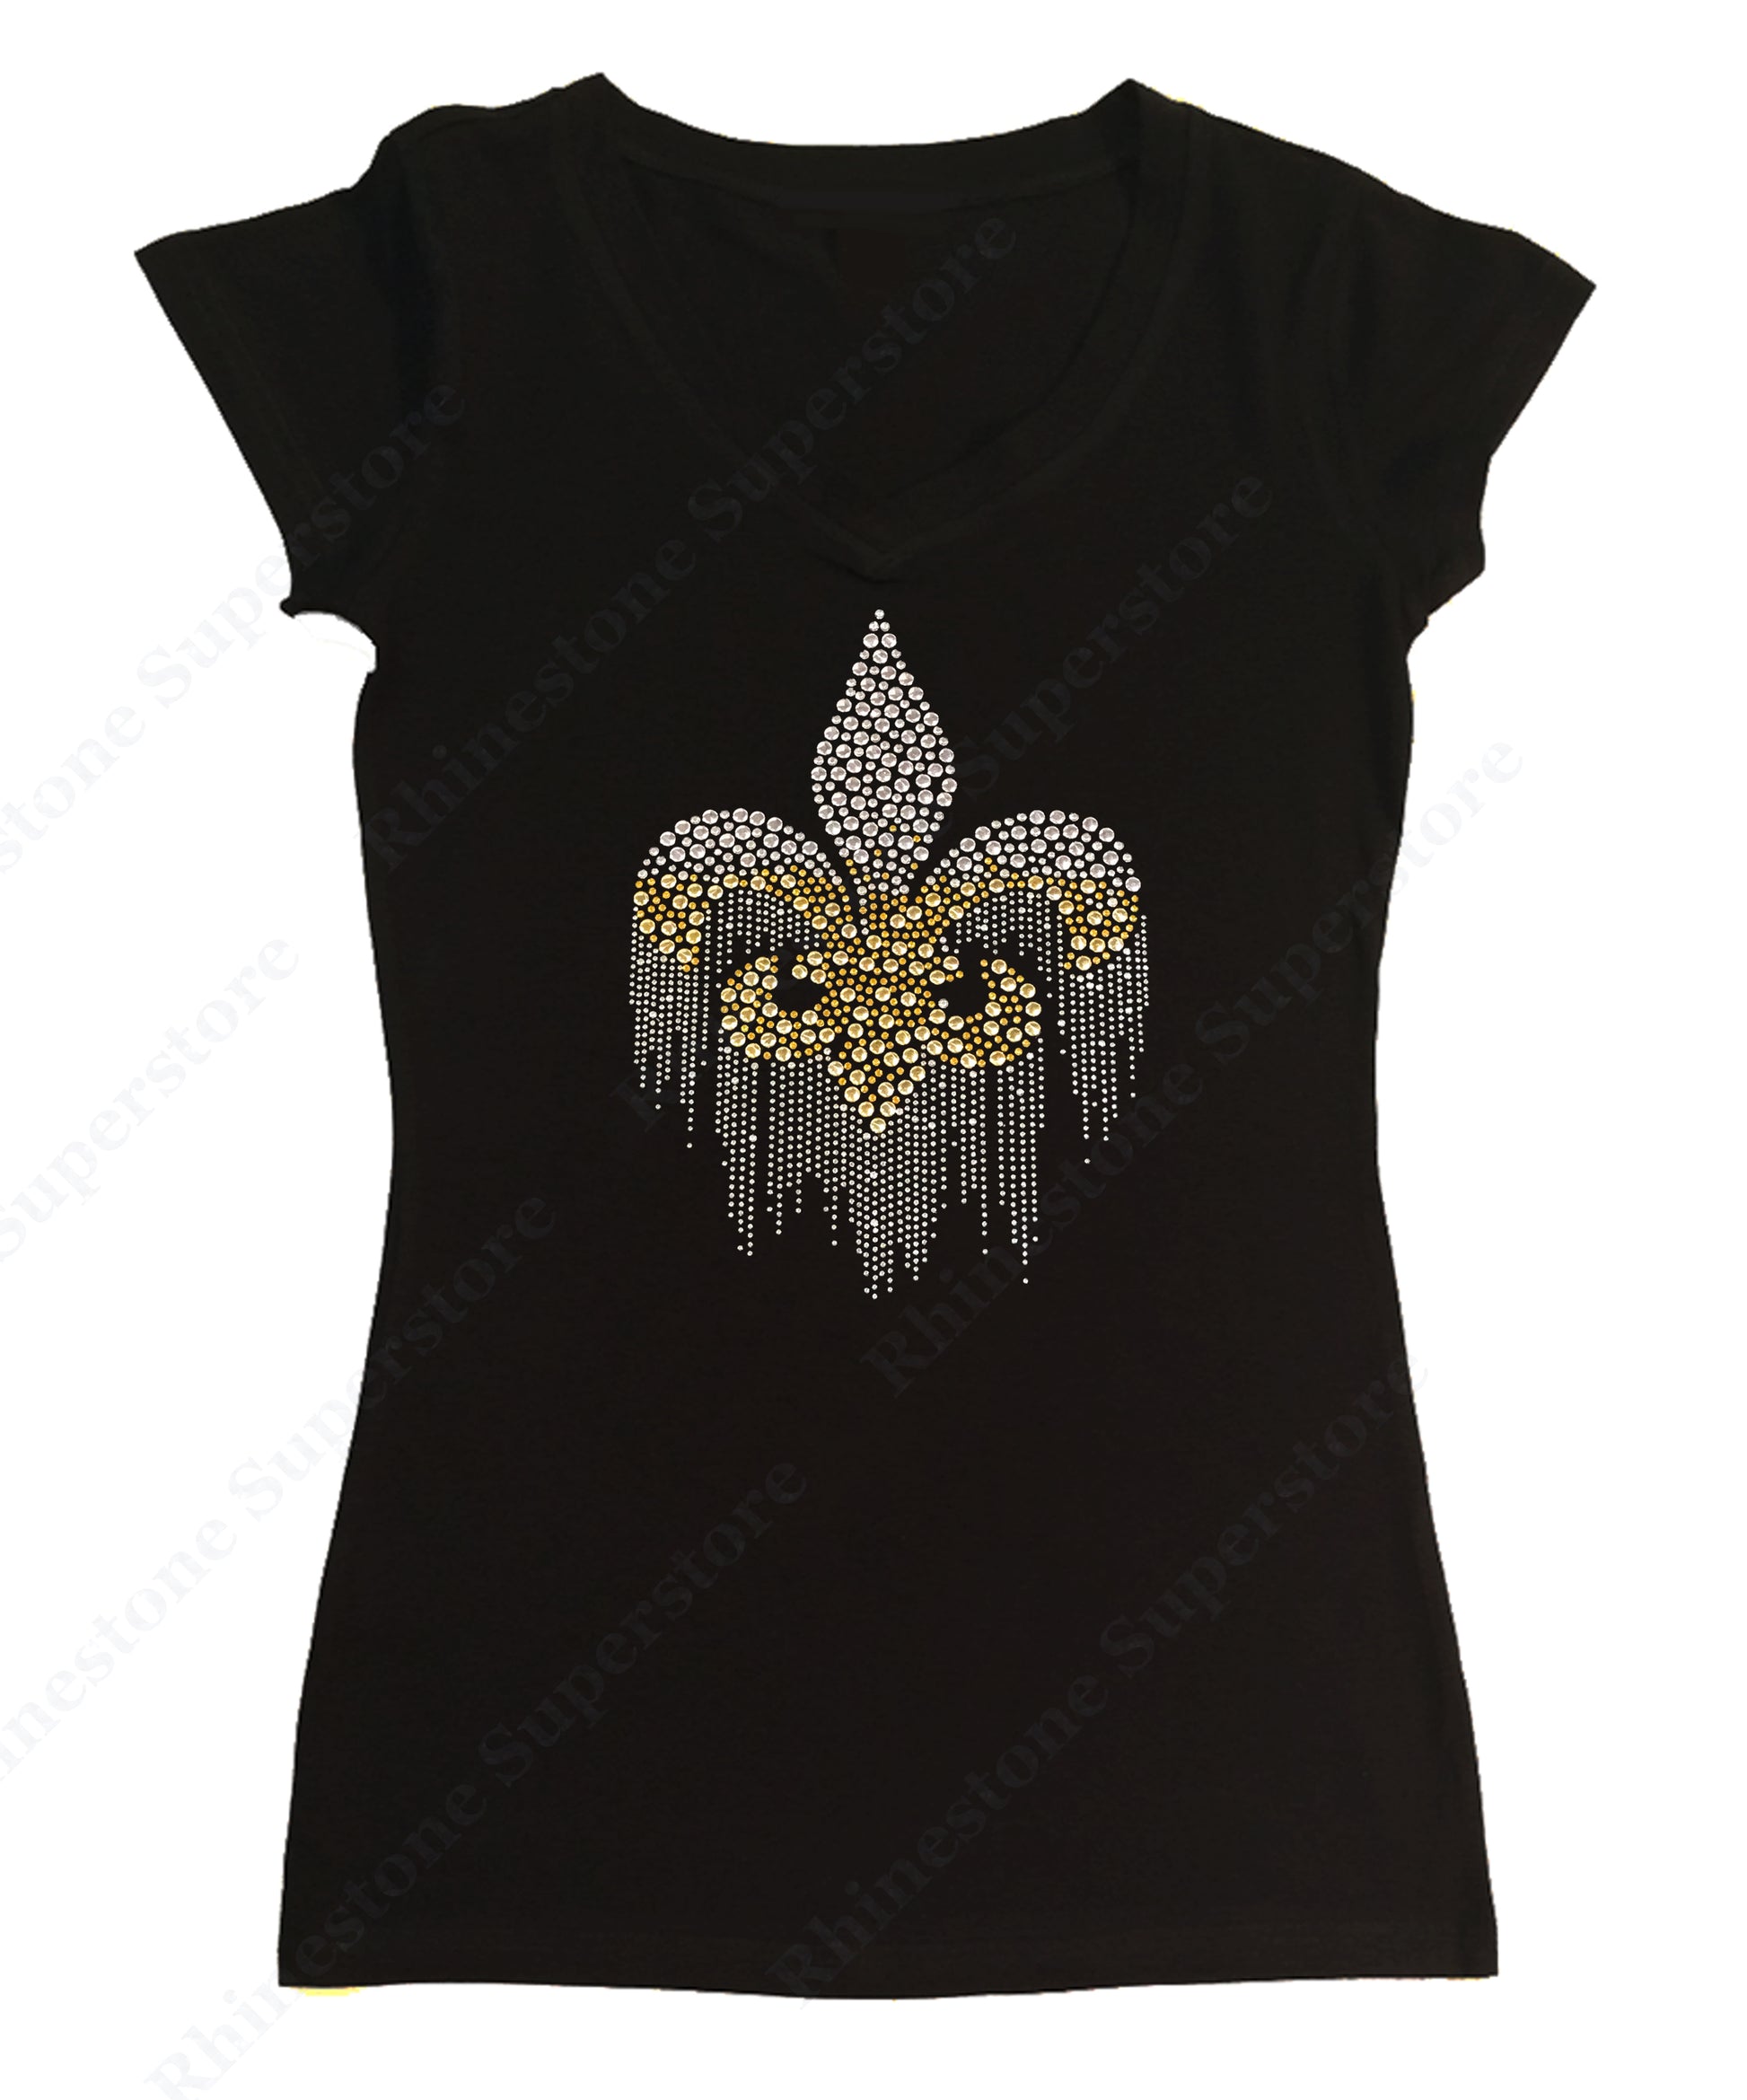 Fluer de Lis Dripping in Silver and Gold Rhinestuds